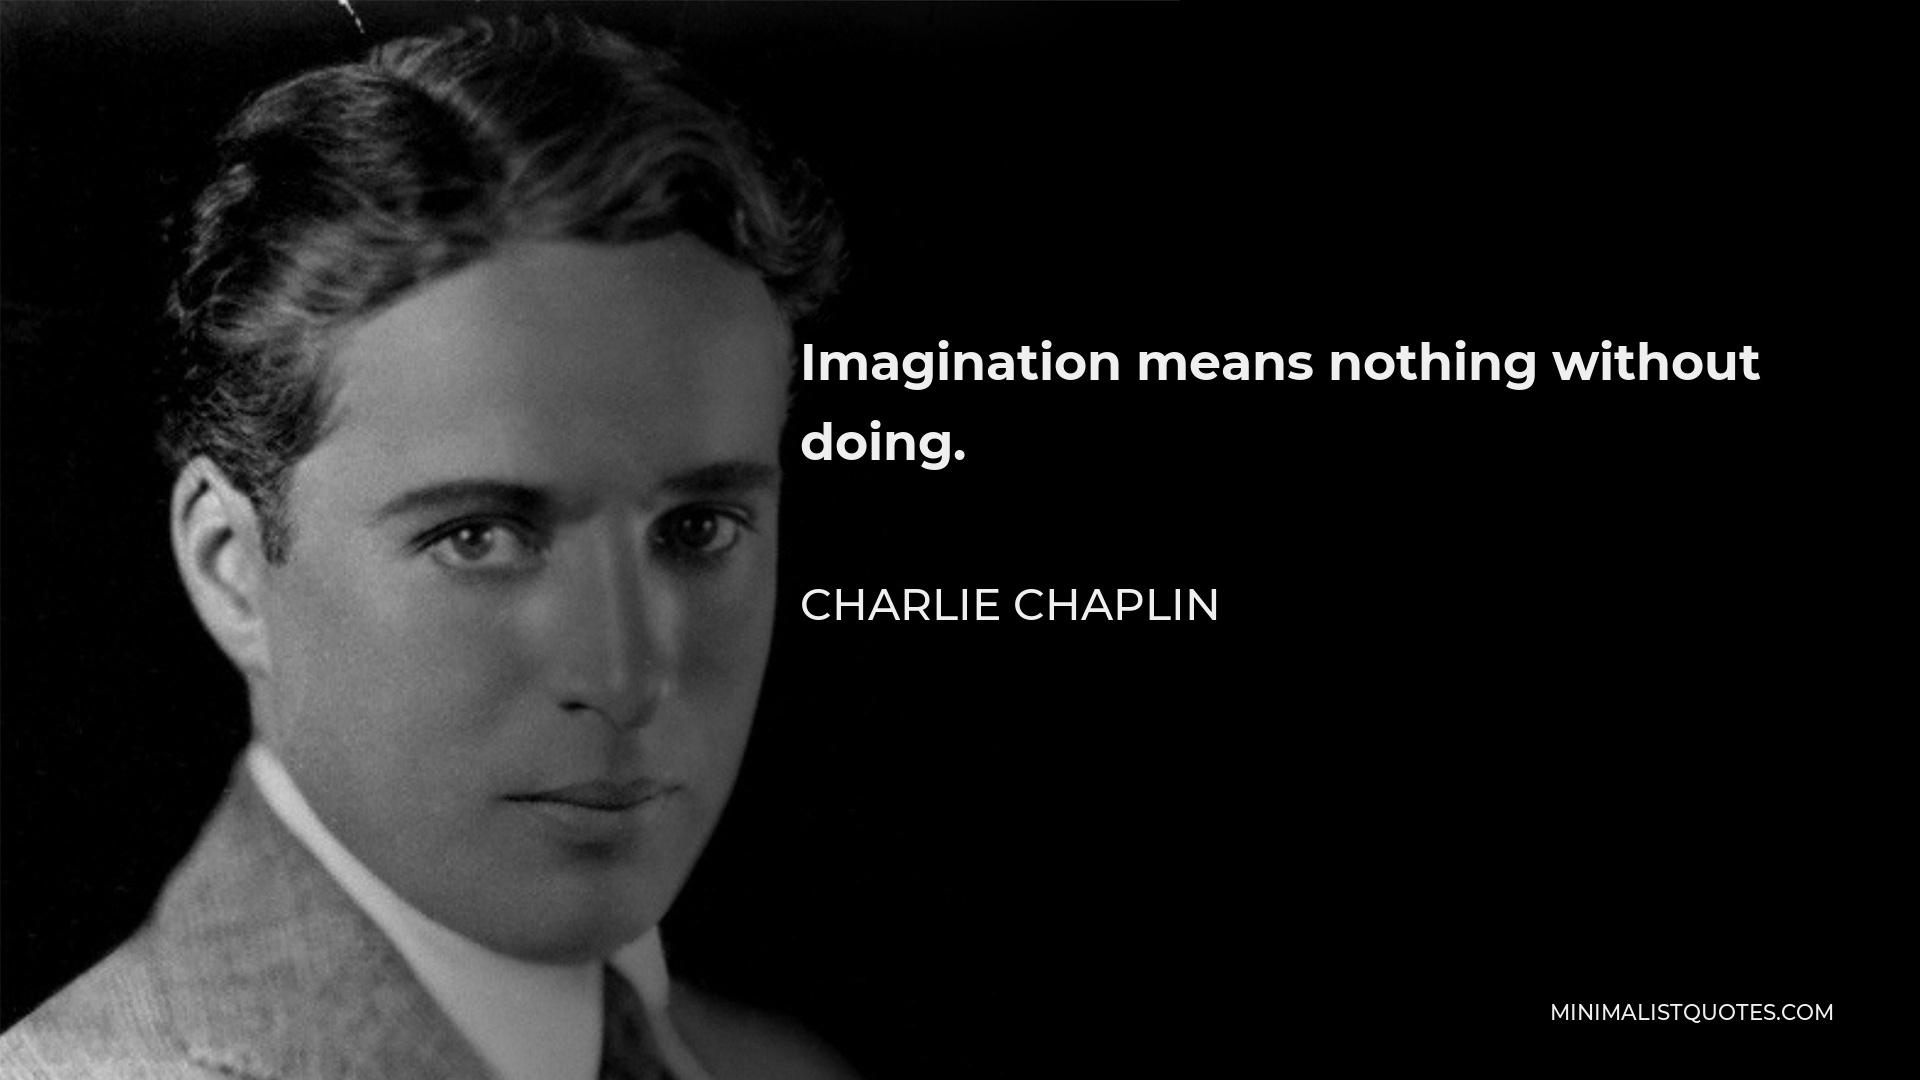 Charlie Chaplin Quote - Imagination means nothing without doing.